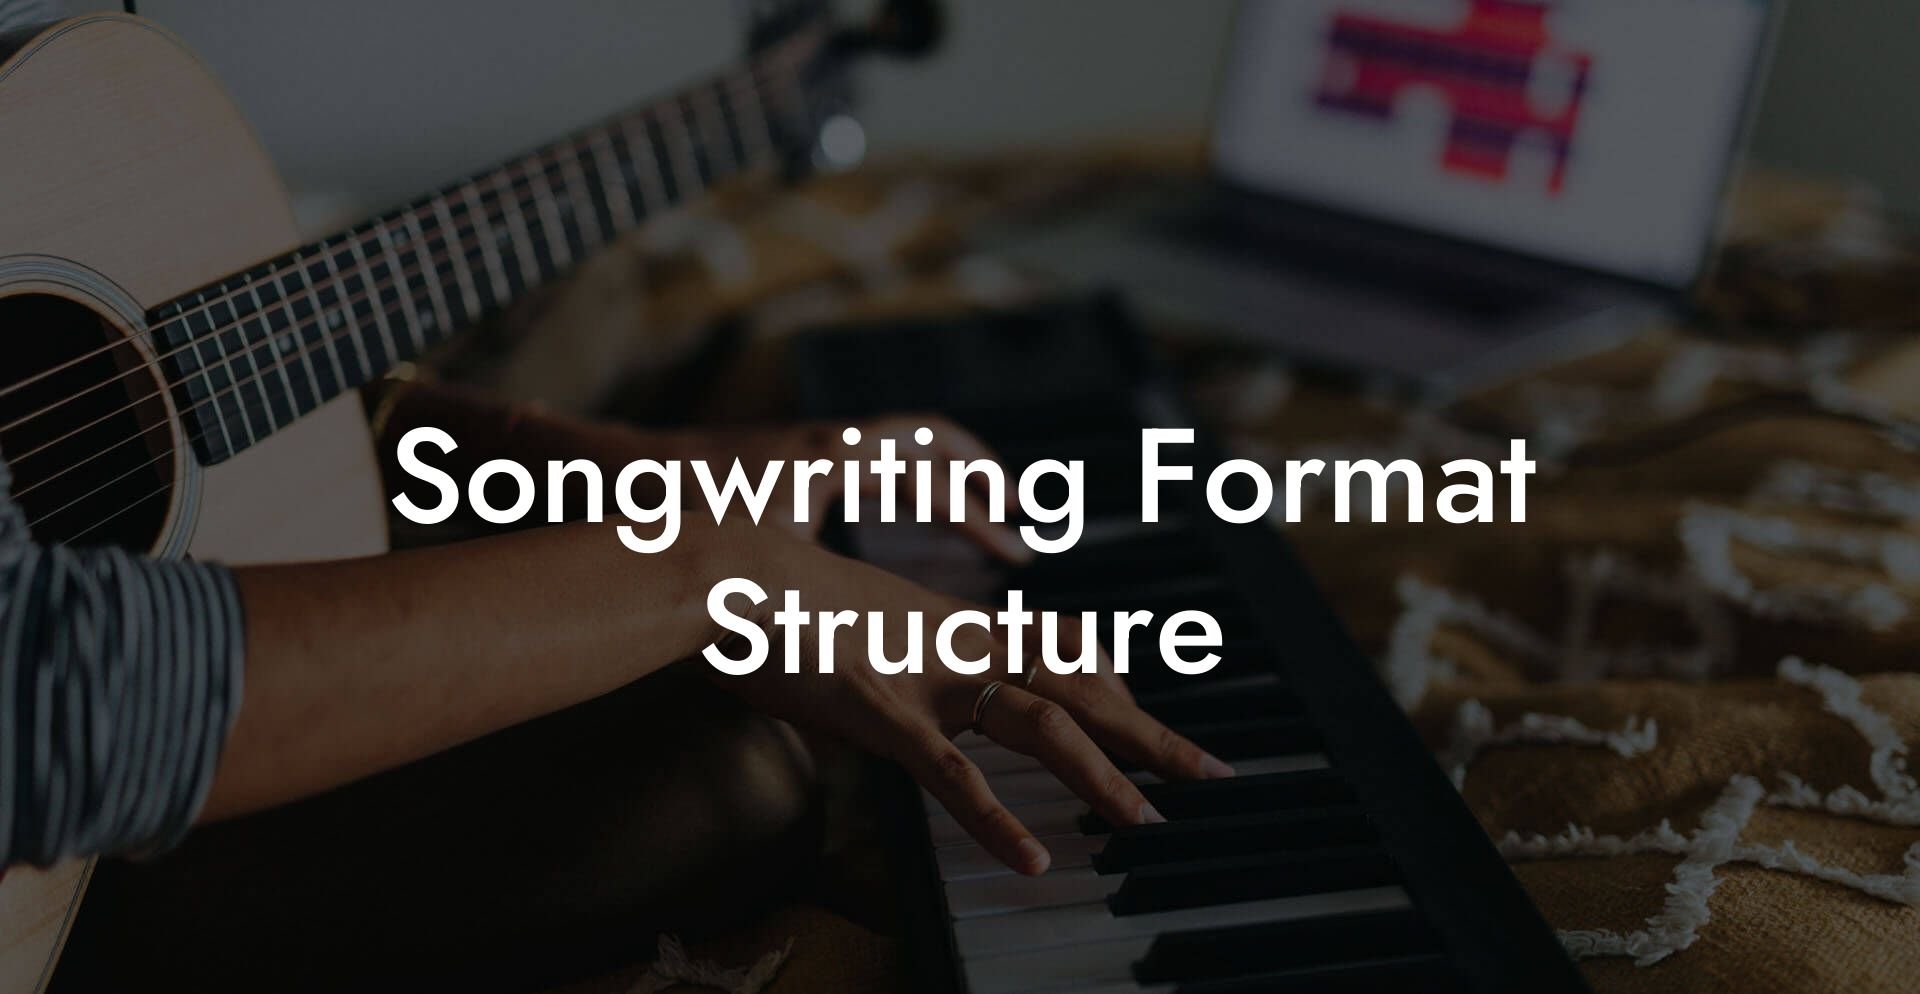 songwriting format structure lyric assistant